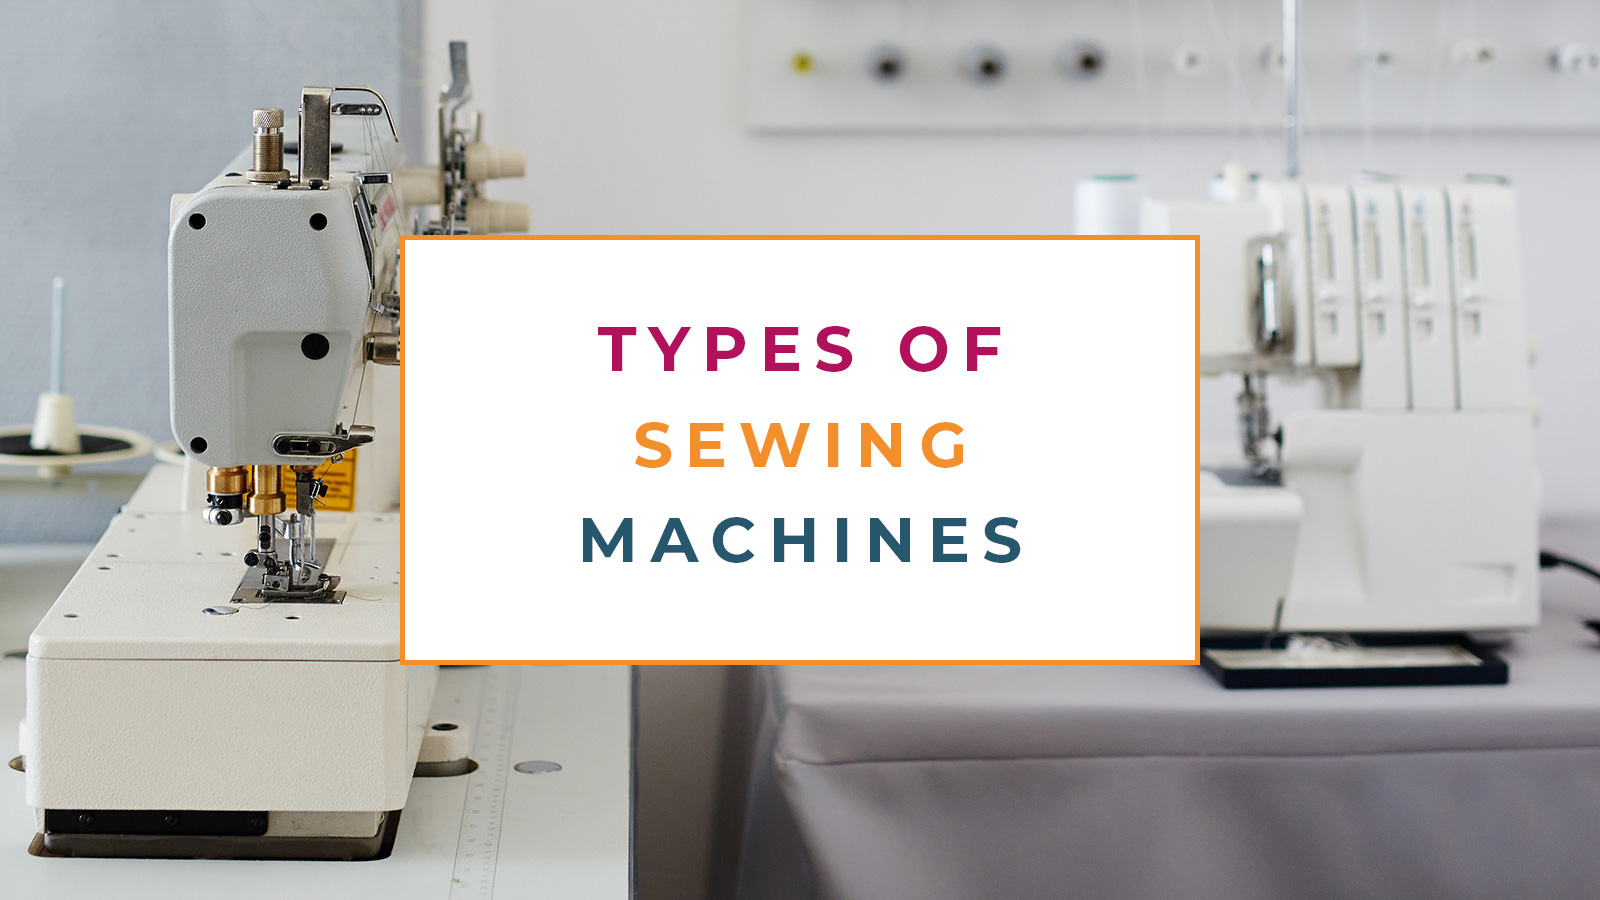 Classification of Sewing Machine Needles